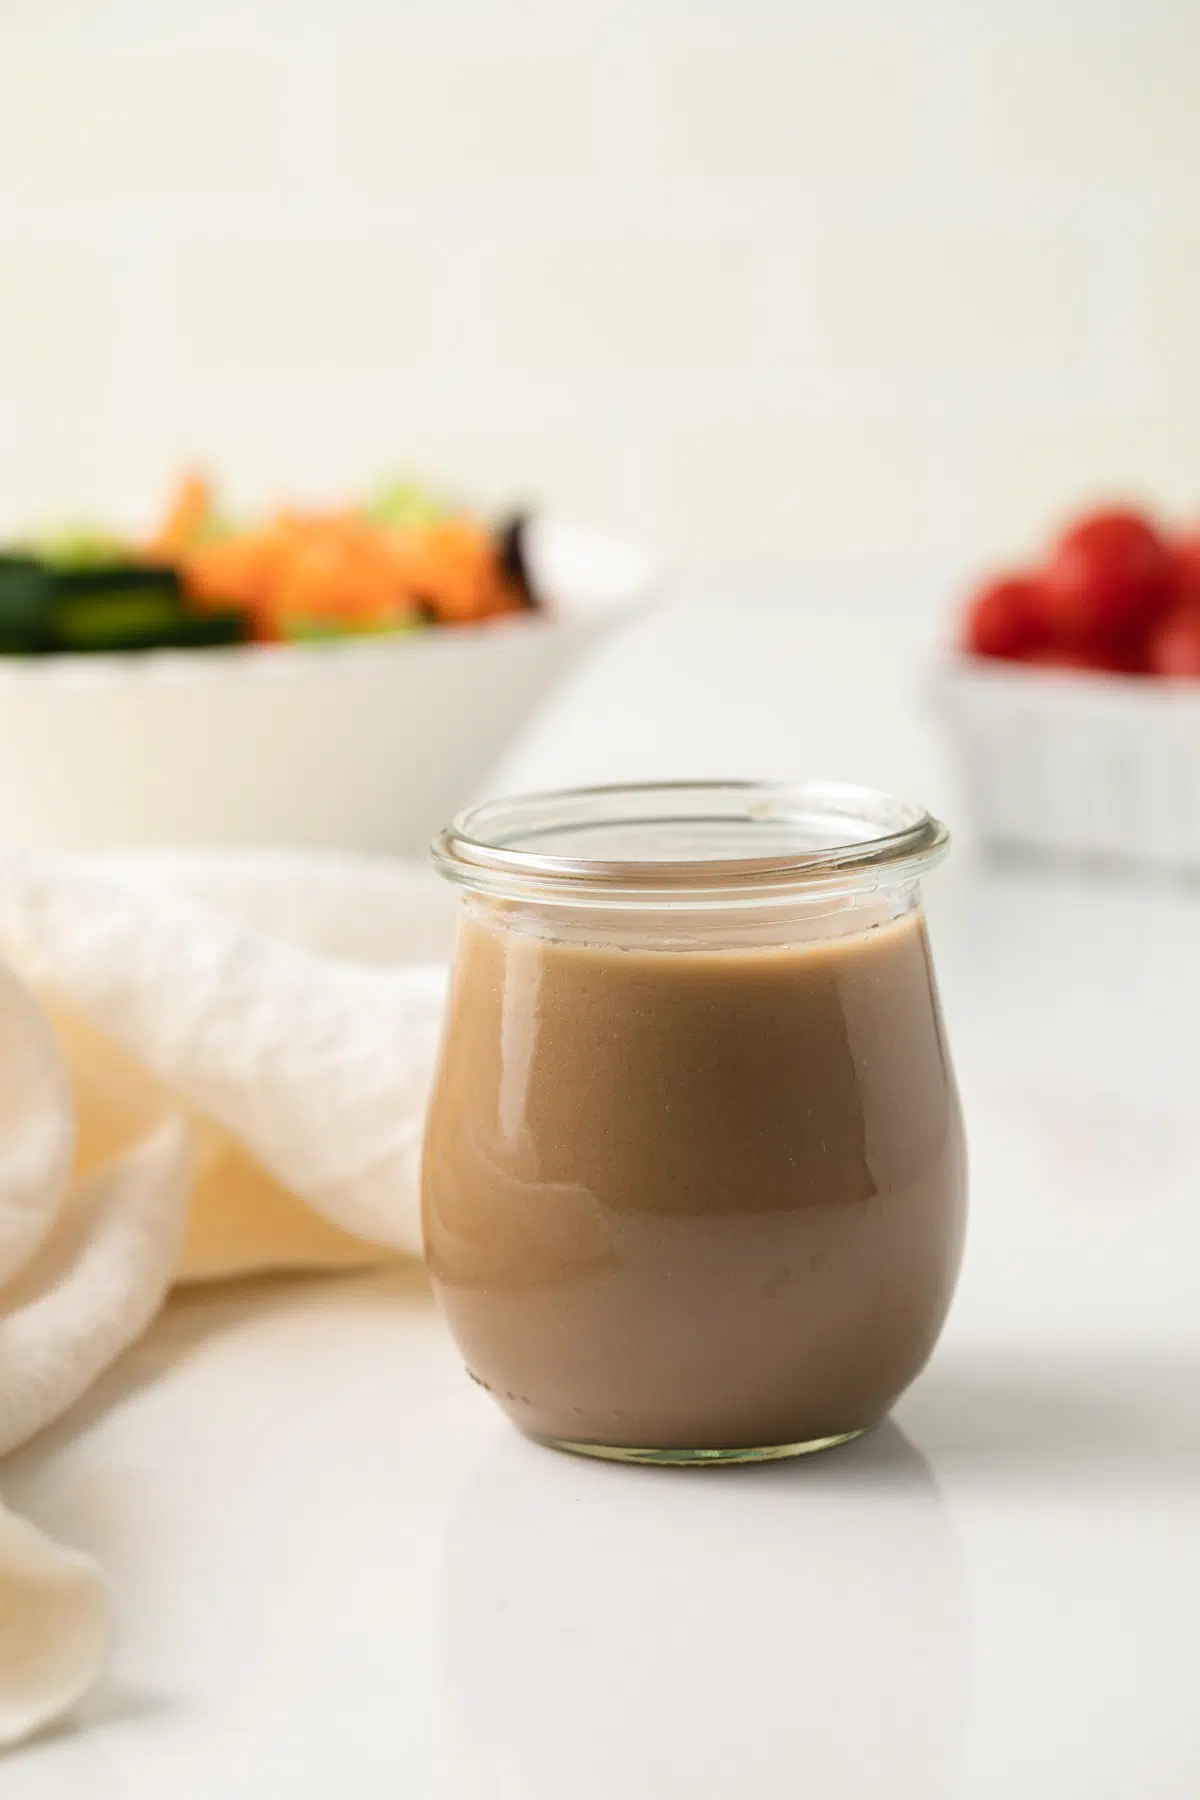 Creamy balsamic dressing in a glass jars.